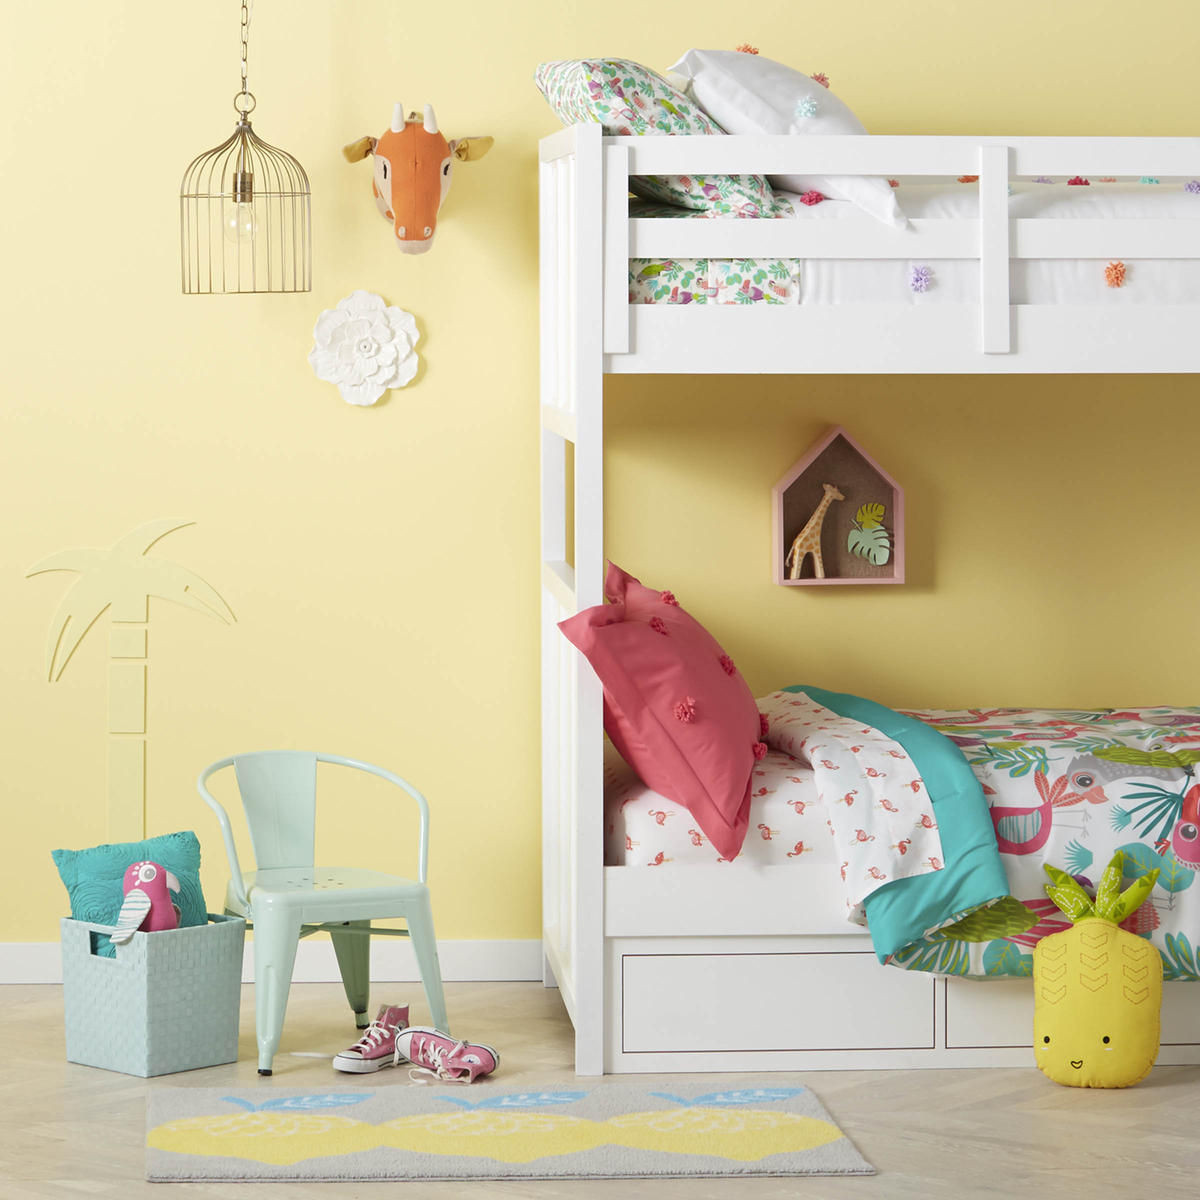 Target Kids Room Decor
 Cozy Up to Tar s New Pillowfort Kids Decor Collection